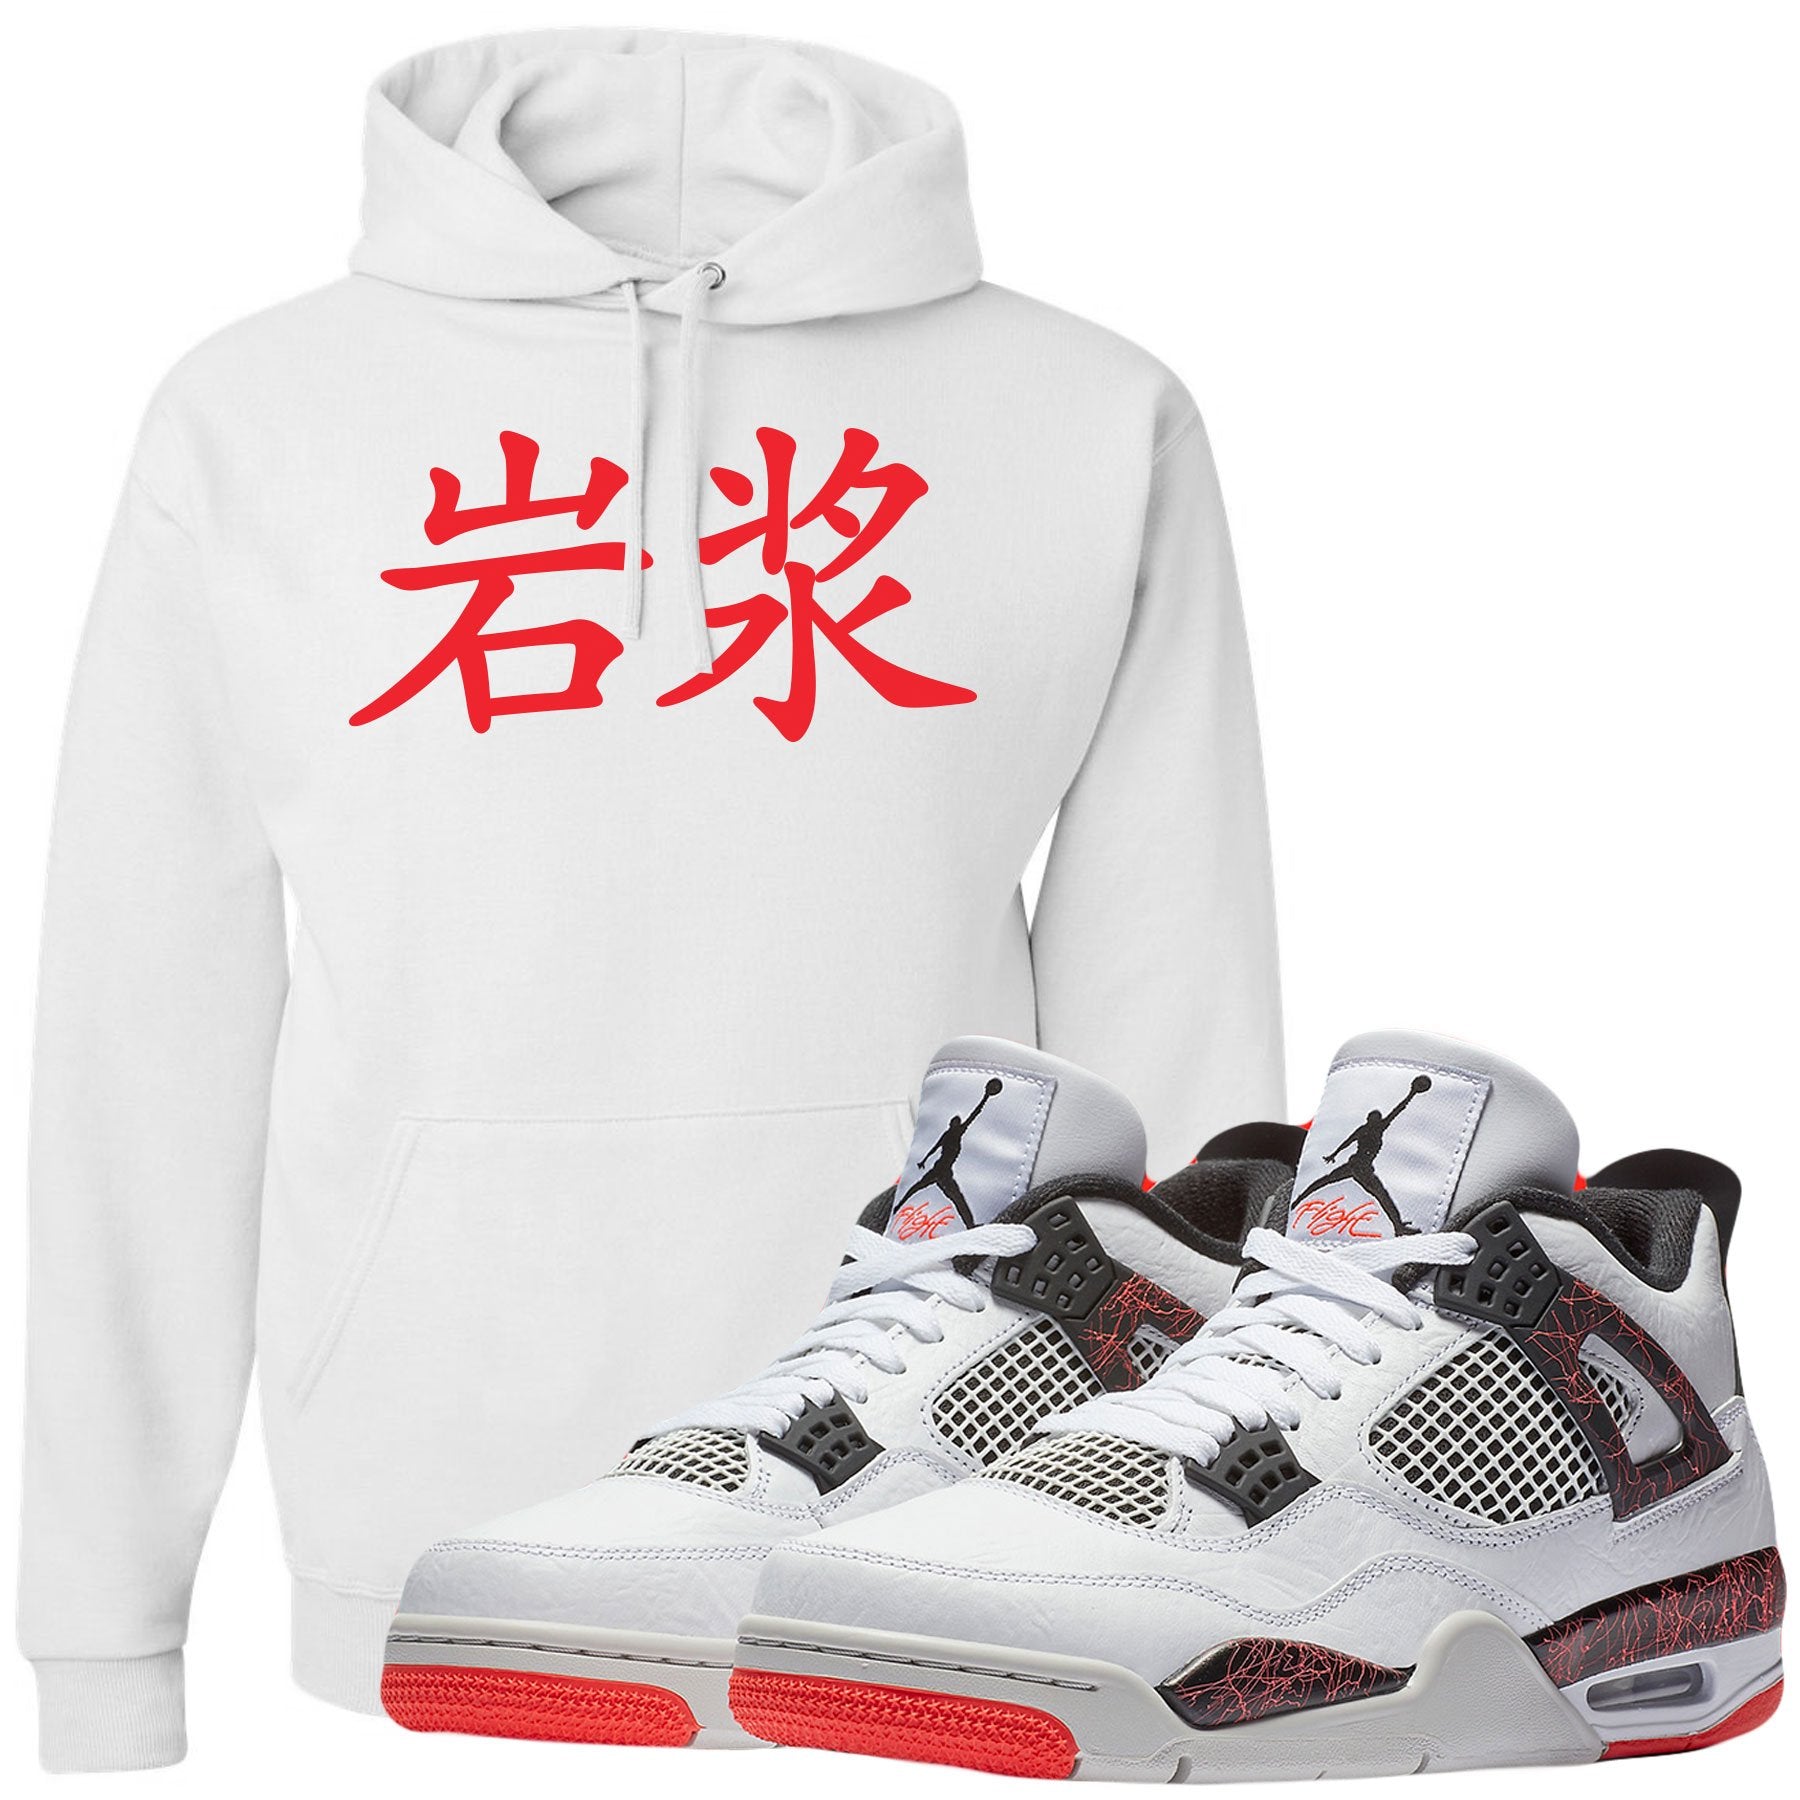 Match your pair of Jordan 4 Pale Citron "Hot Lava 4s" sneakers with this sneaker matching hoodie